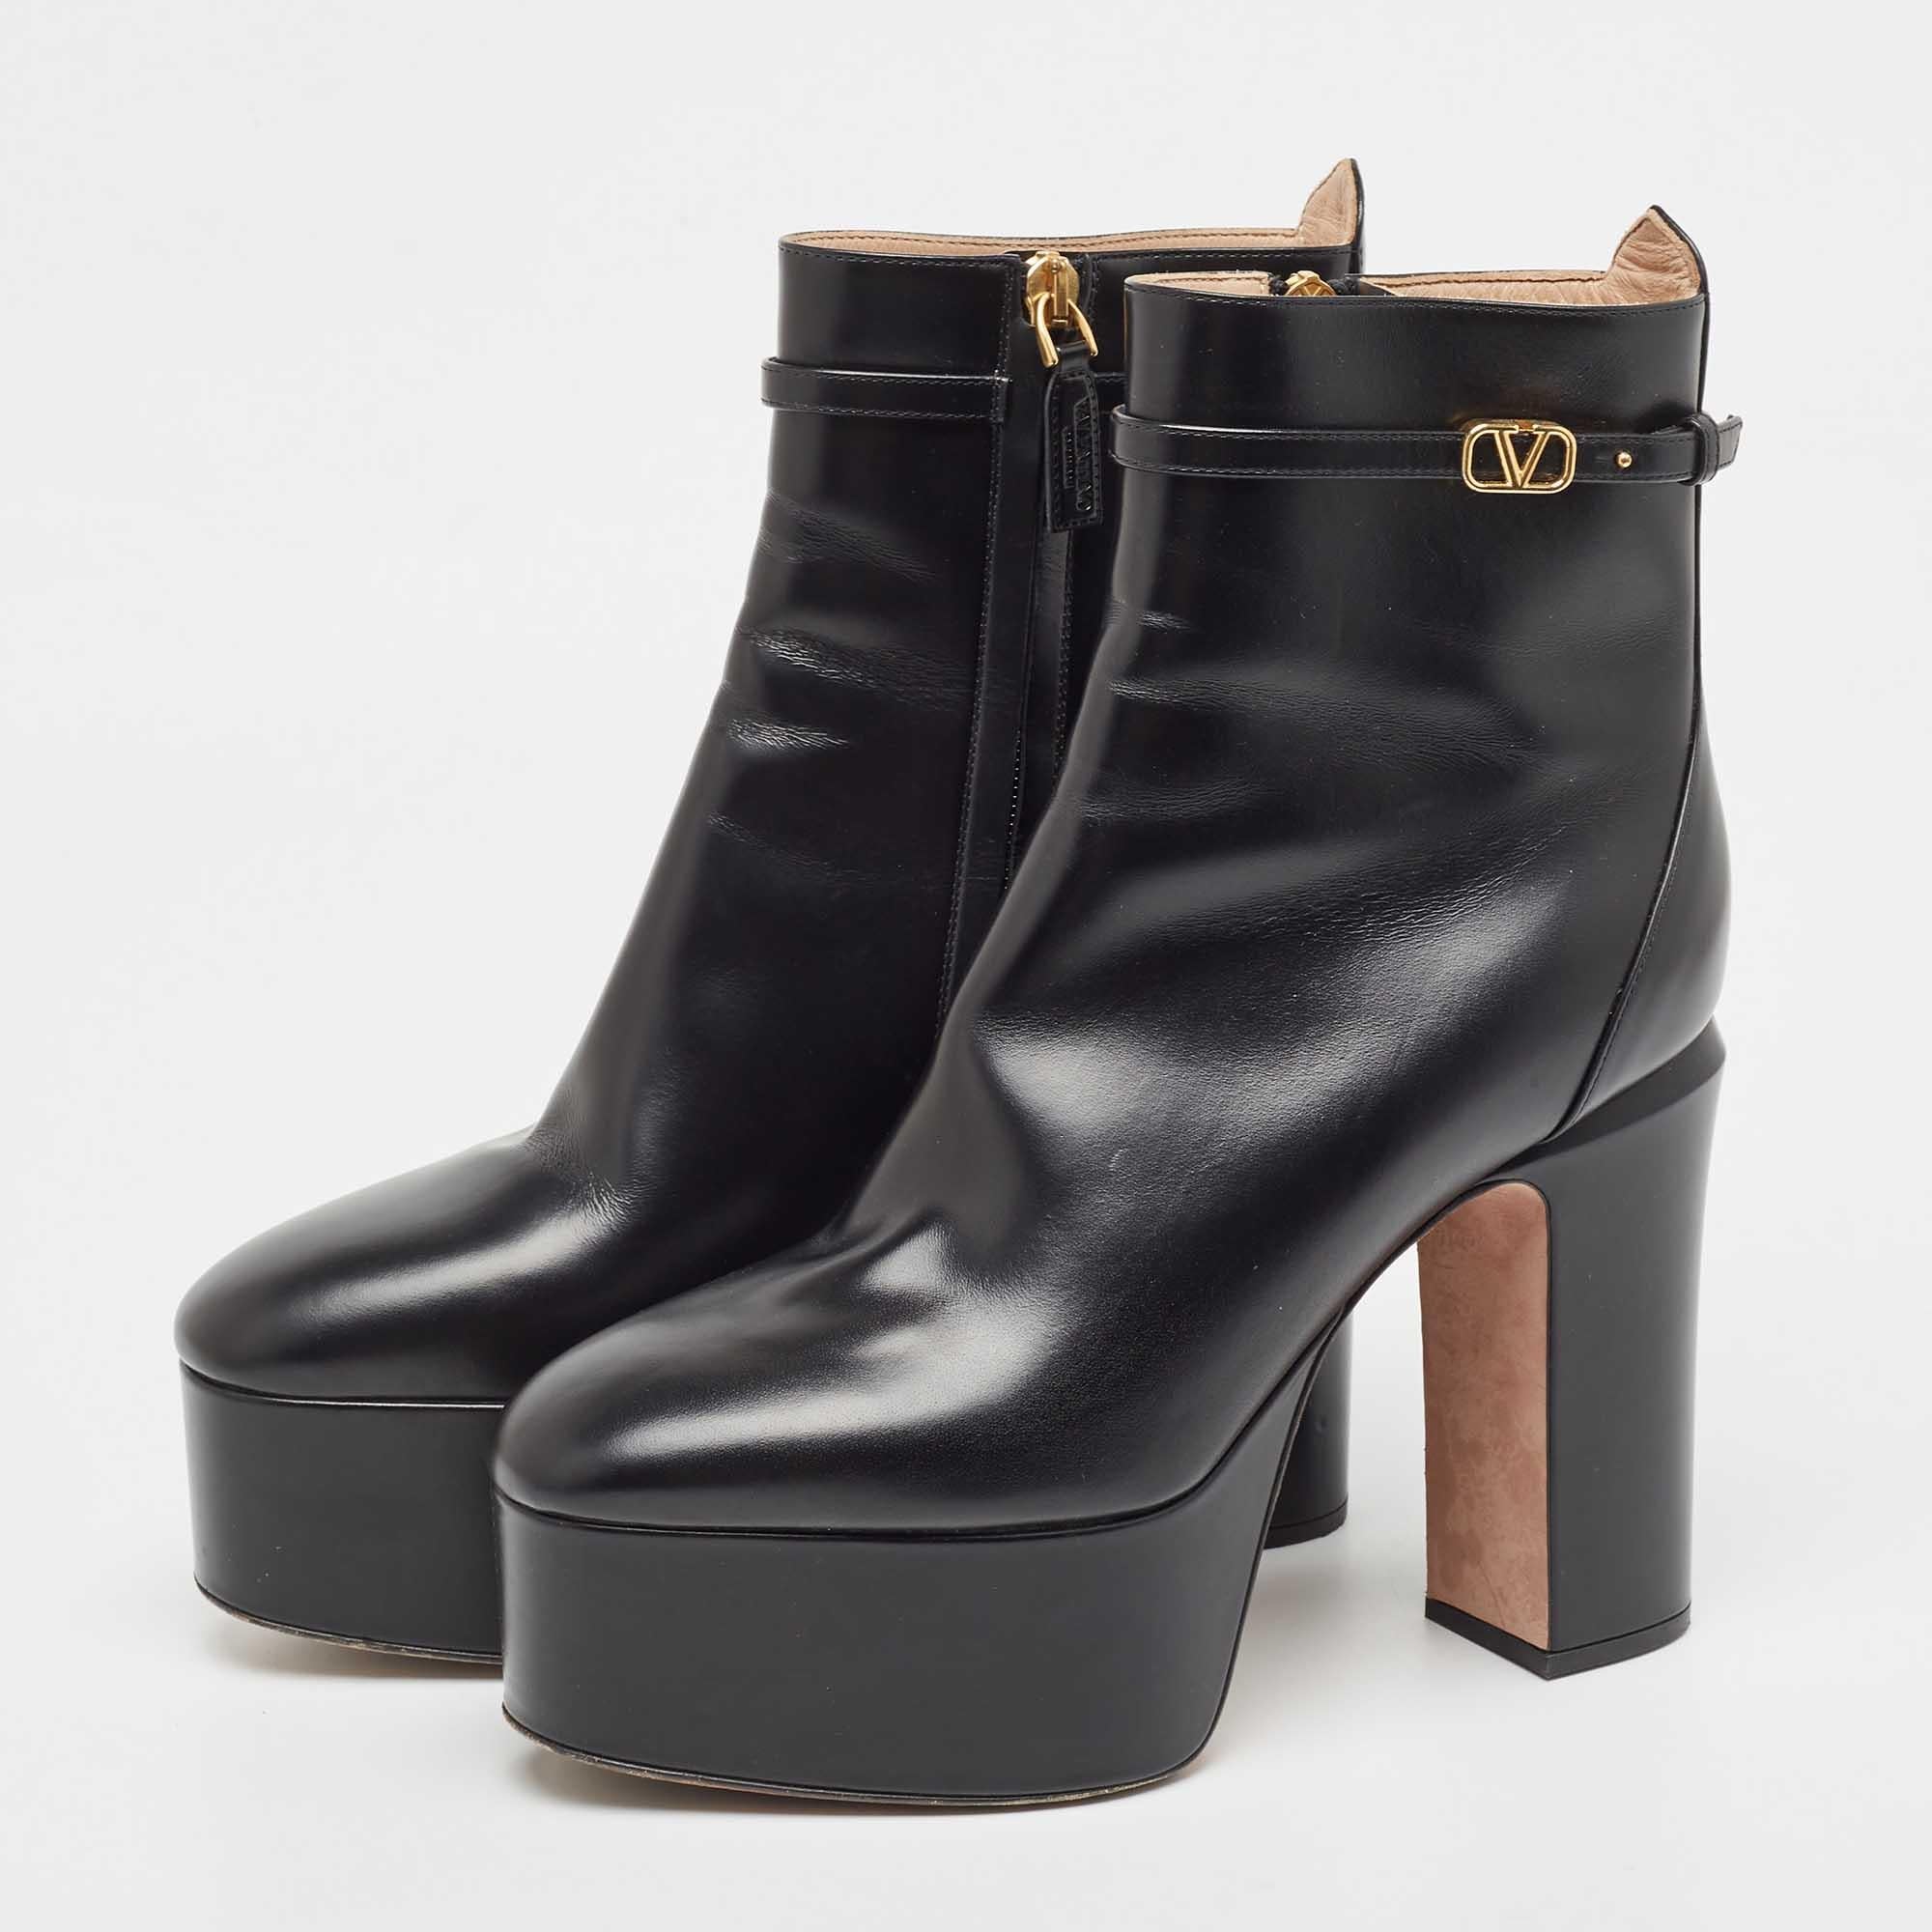 If the quest is for a pair of statement boots, we'll gladly choose this one by Valentino. The women's boots are crafted from leather and are lifted on platforms and block heels.

